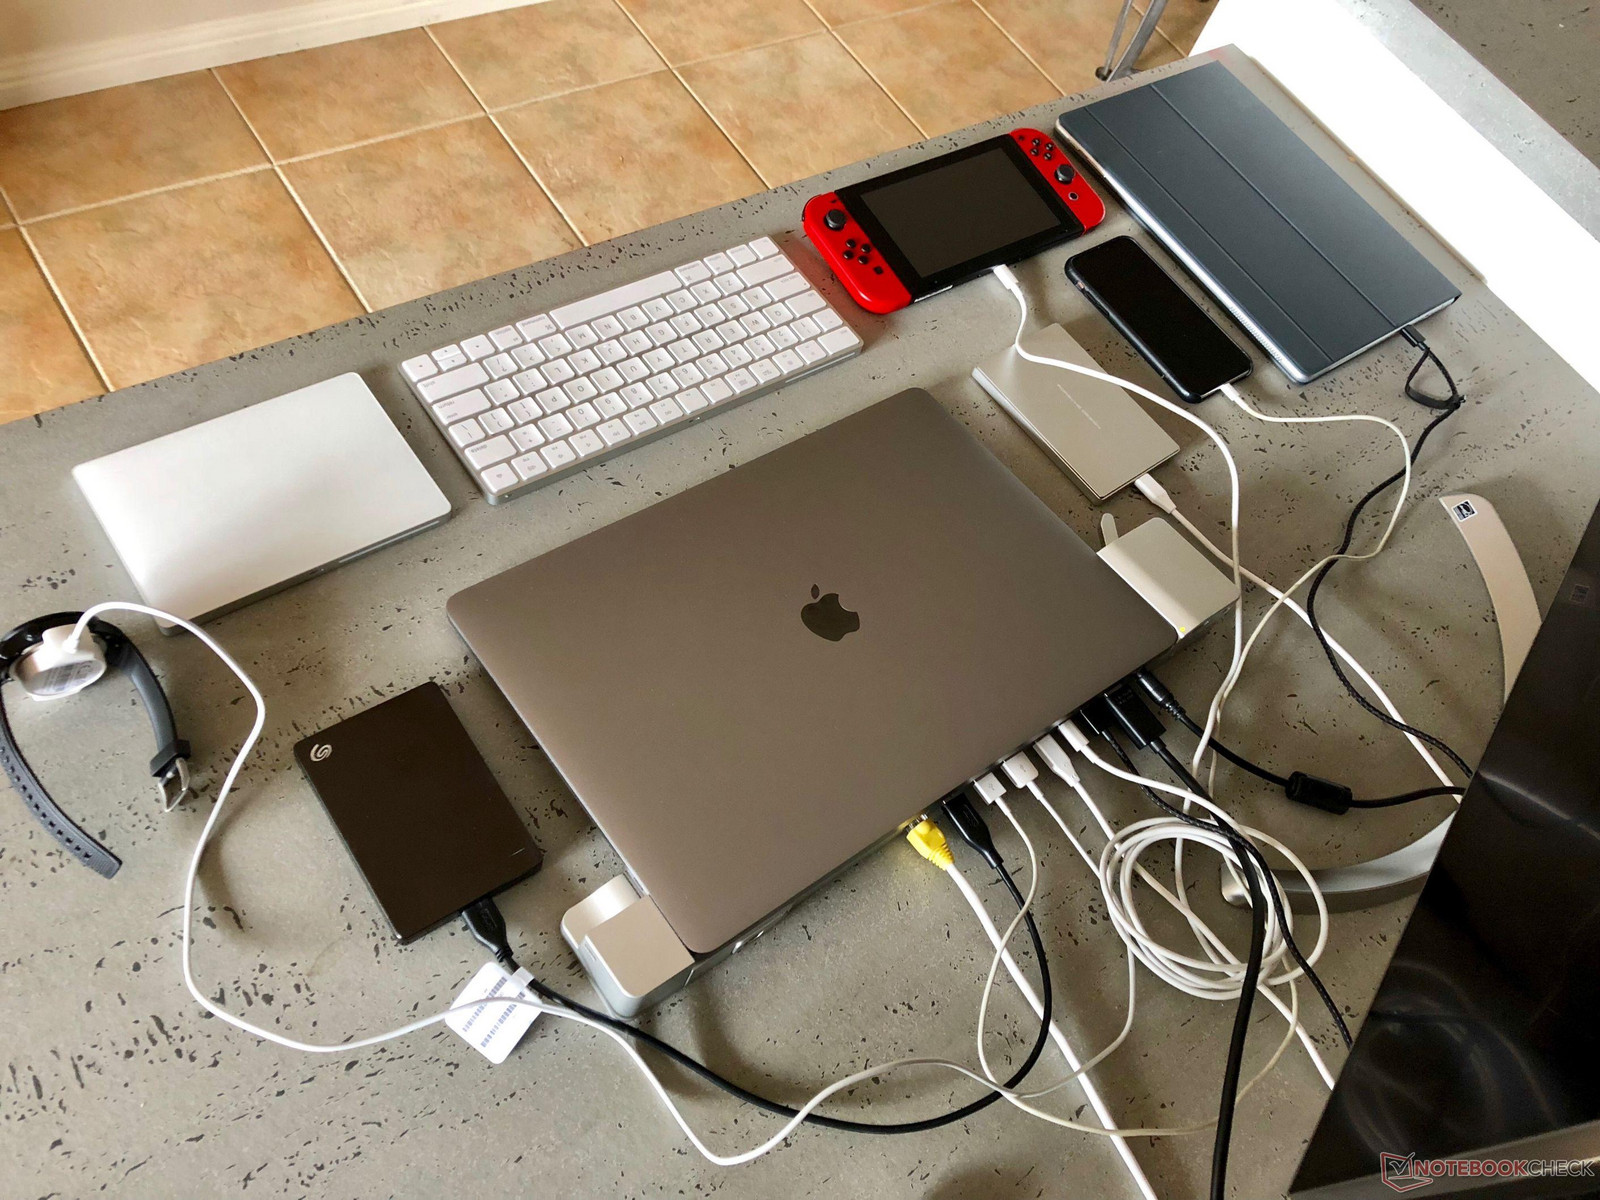 Docking Station for the 16-inch MacBook Pro - LandingZone